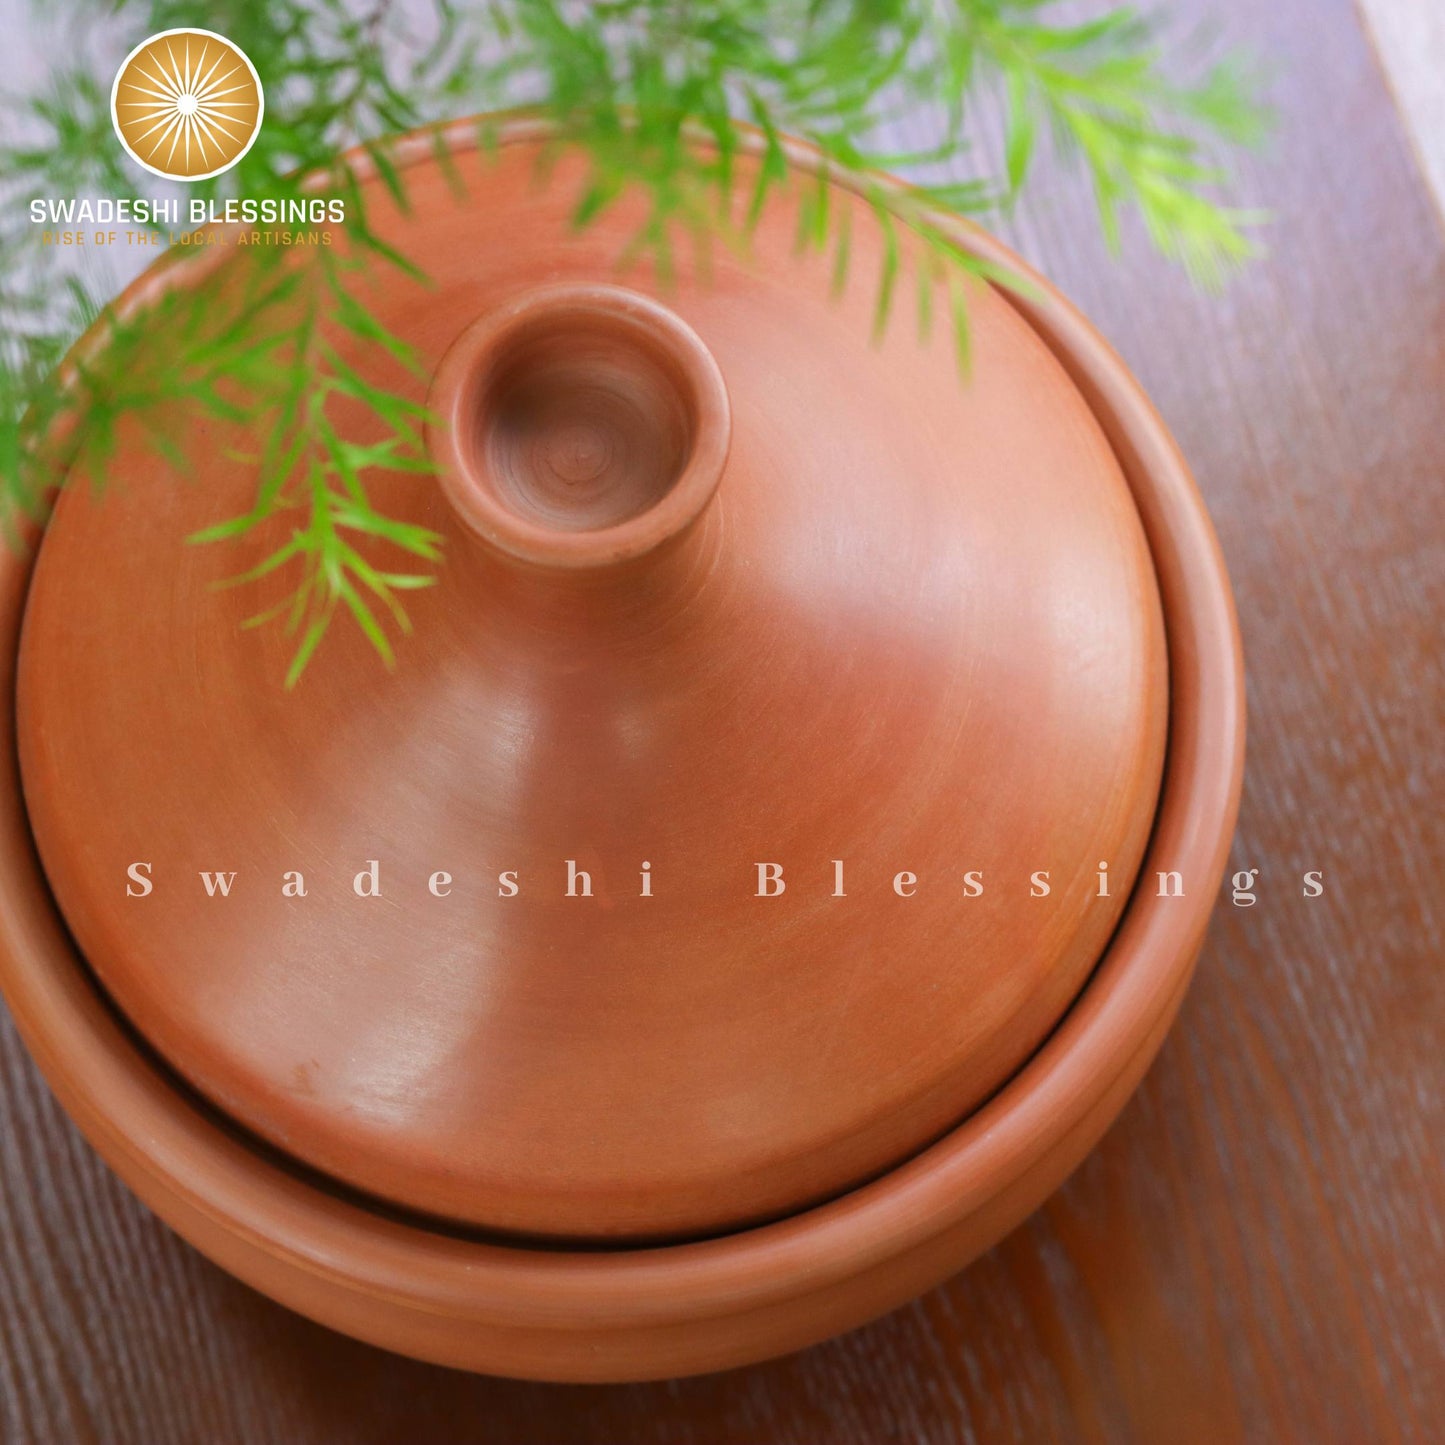 Premium Unglazed Clay Tagine Pot for Cooking | Lead-Free Earthen Tagine | Clay Tagine Cookware for Baking, 2.8L | Includes Free Palm Leaf Stand and Ash for Cleaning Swadeshi Blessings